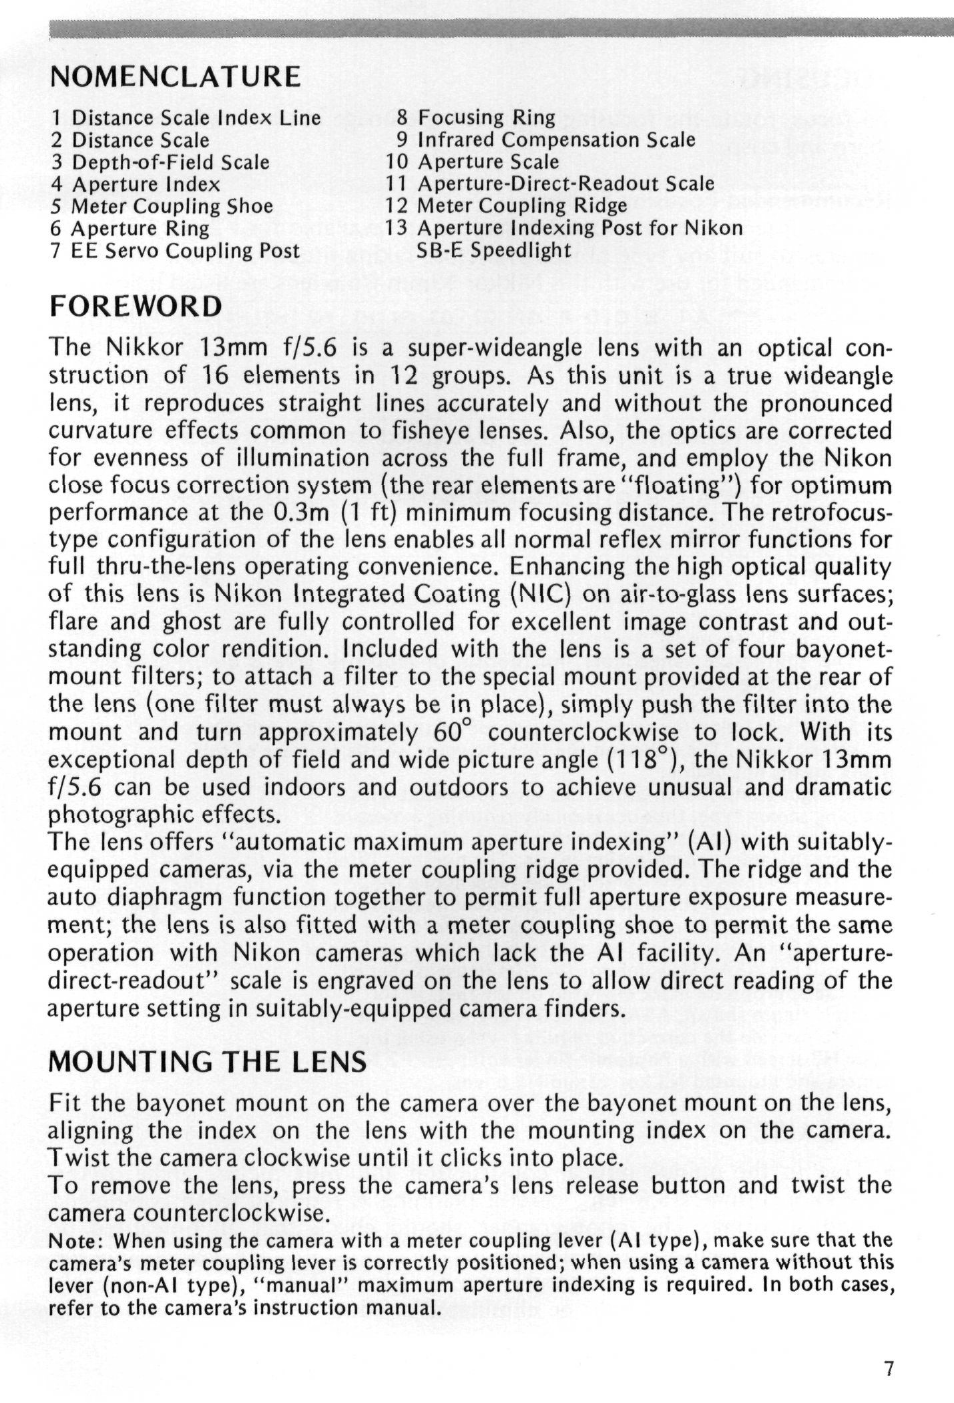 Nomenclature, Foreword, Mounting the lens | Nikon NIKKOR 13mm f-5.6 User Manual | Page 7 / 20